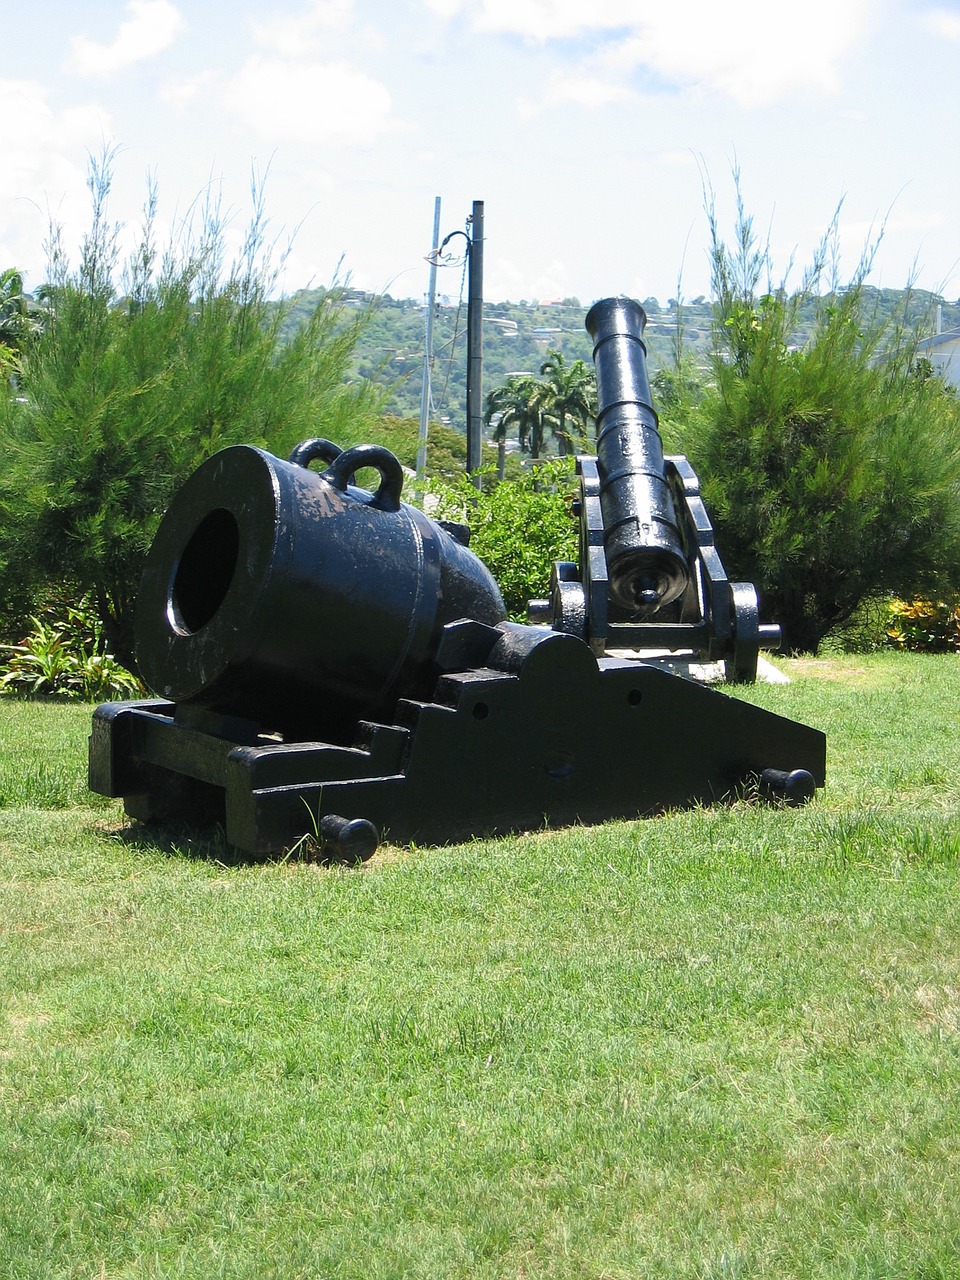 cannon old weapons free photo